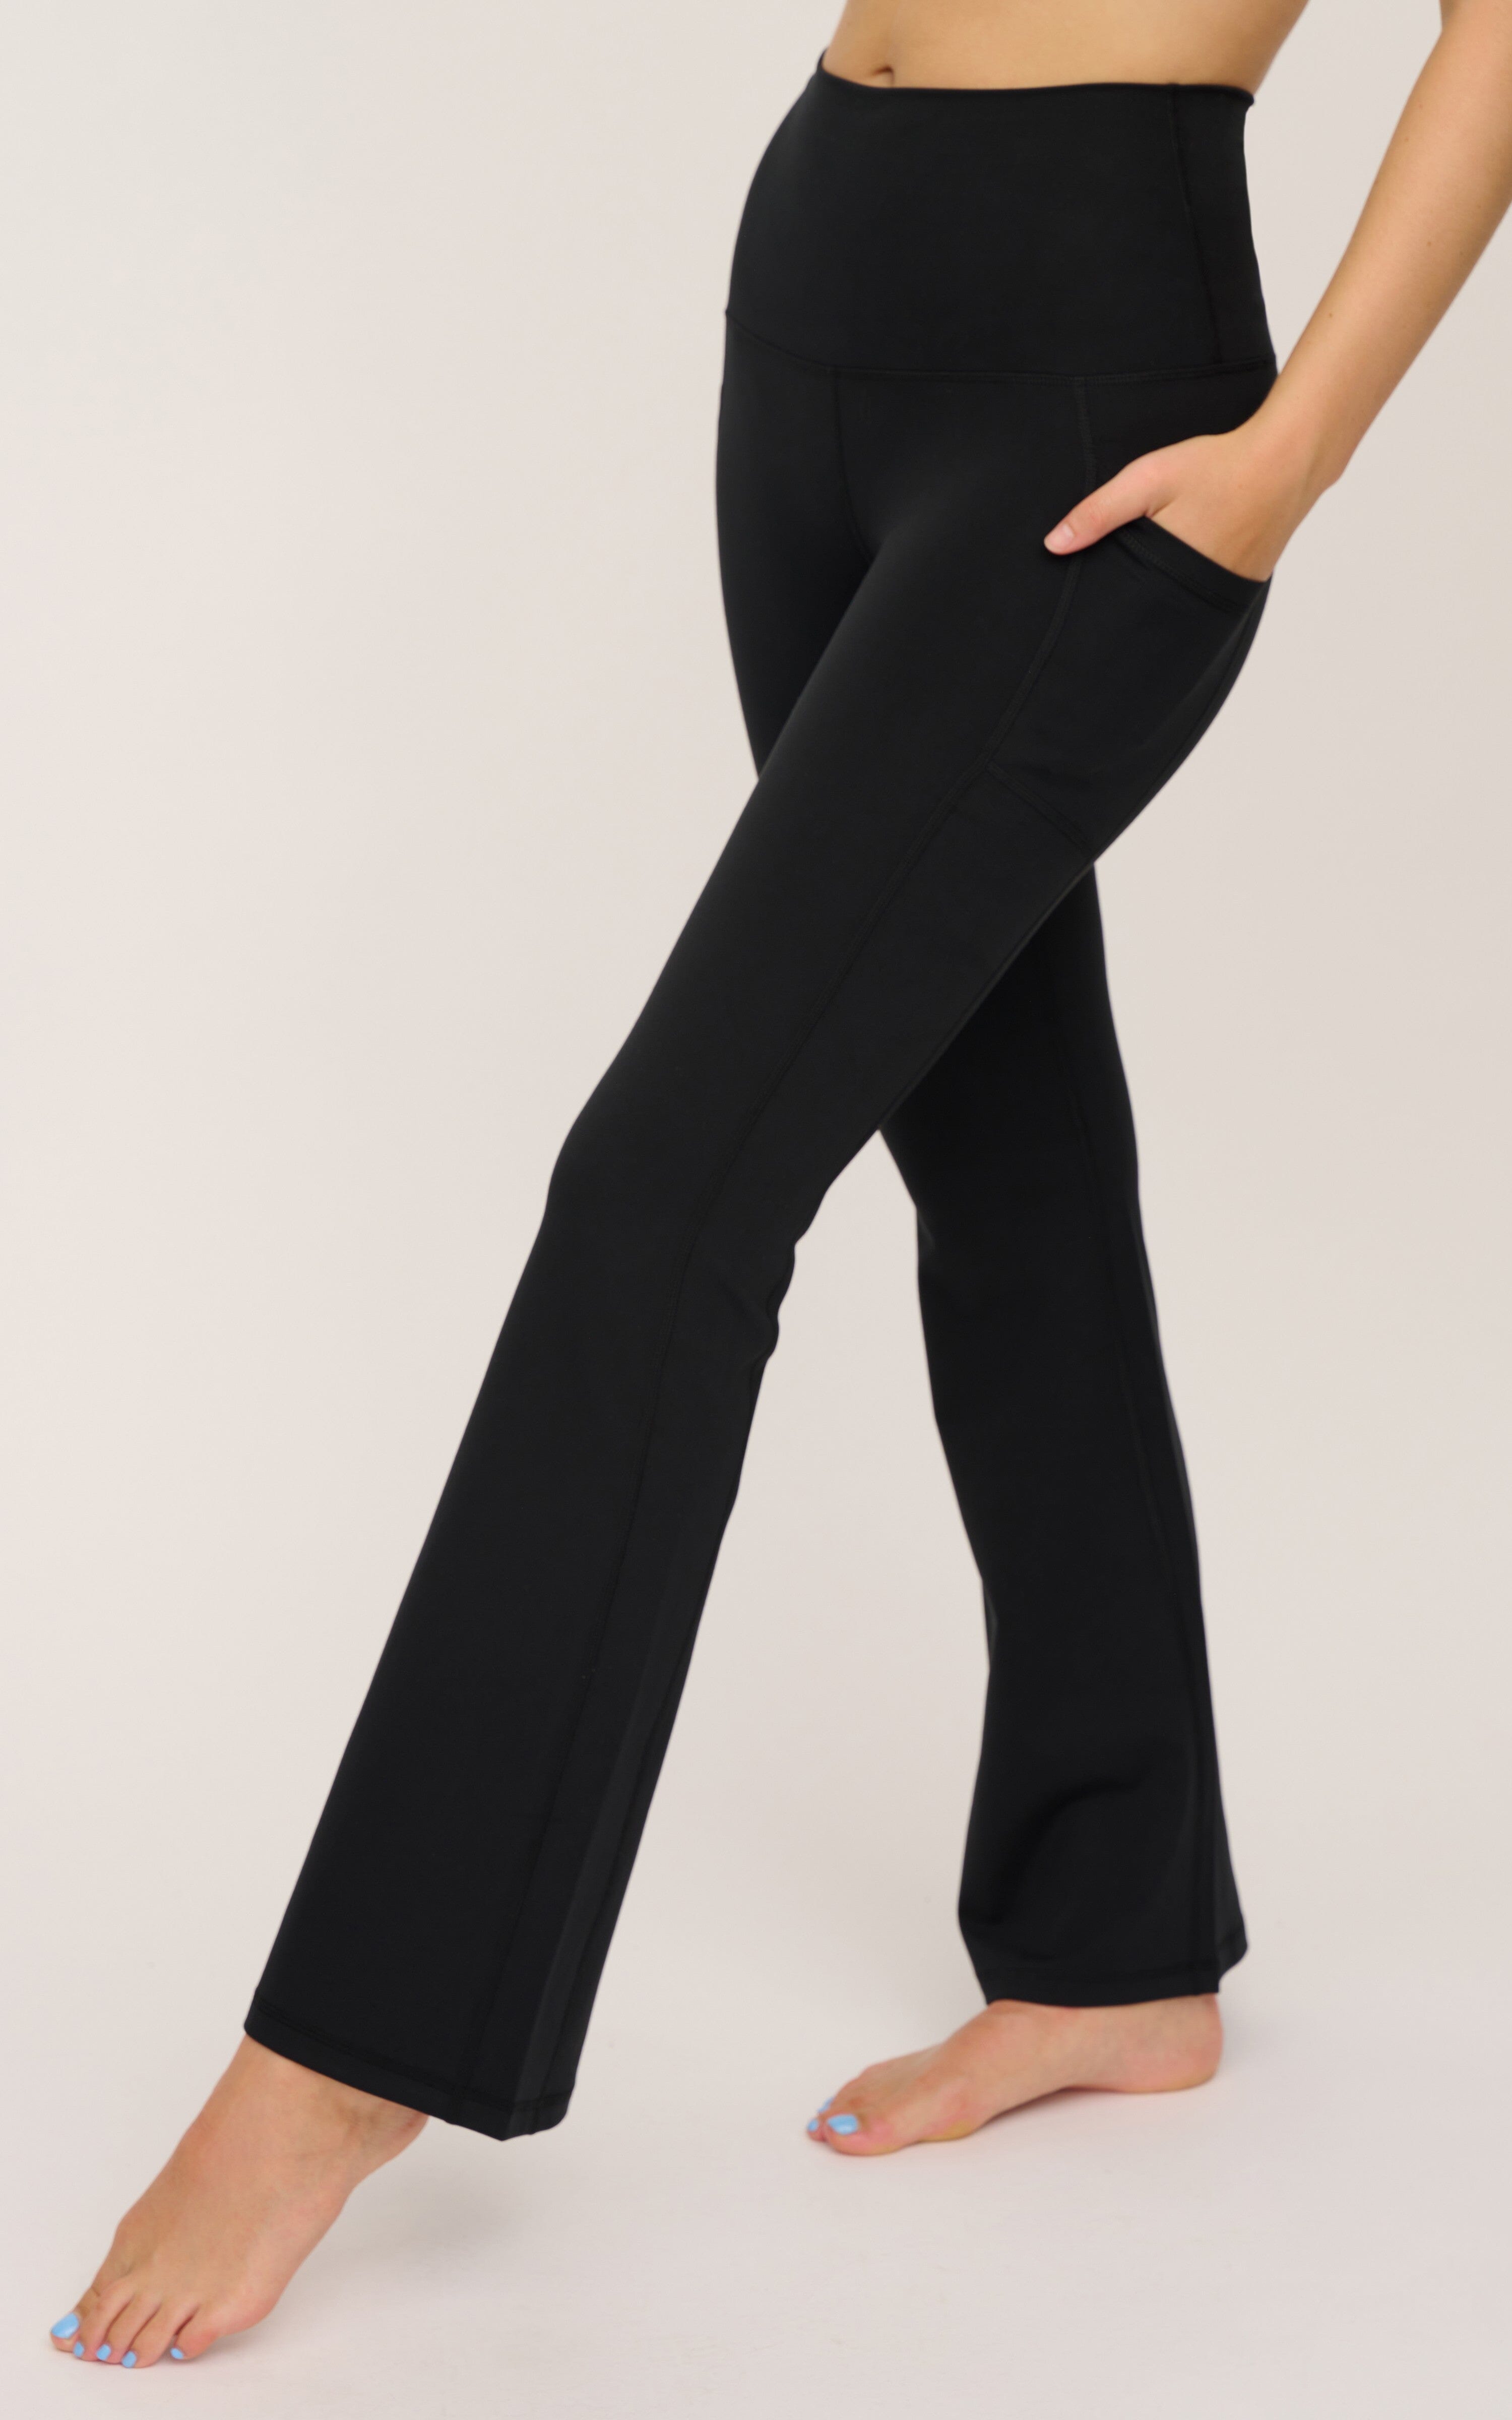 Black Flare Yoga Pant with Side Pockets